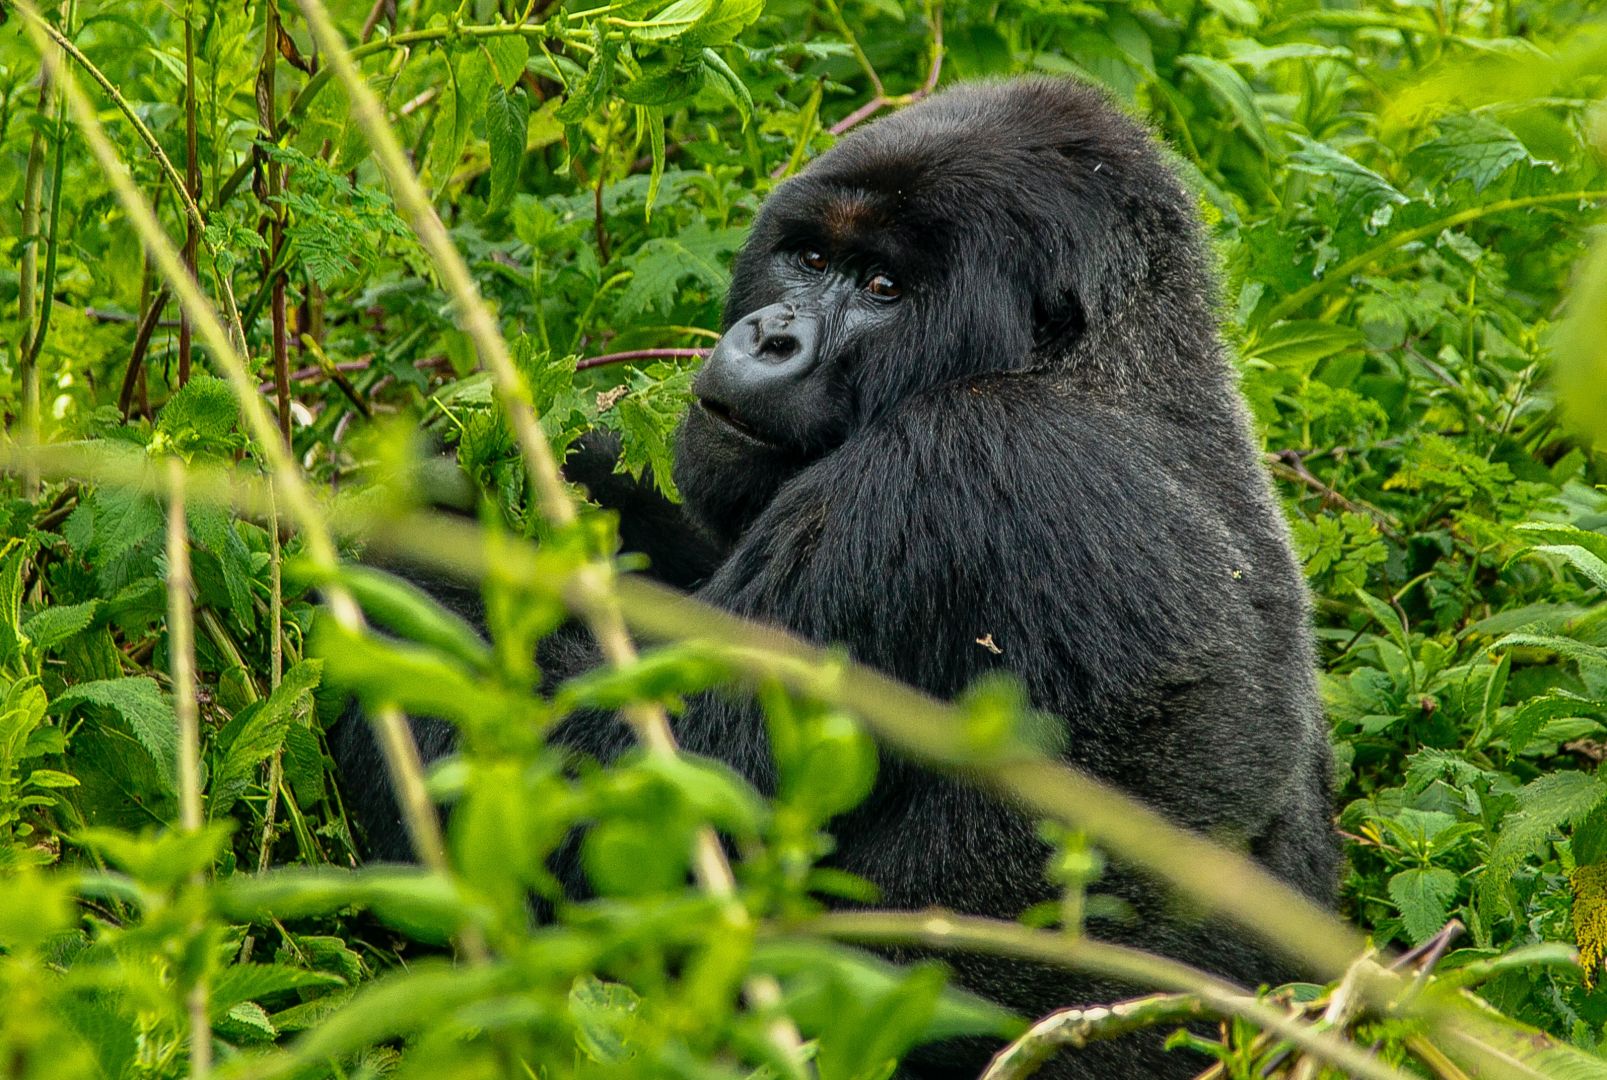 In DRC, community ownership of forests helps guard the Grauer’s gorilla